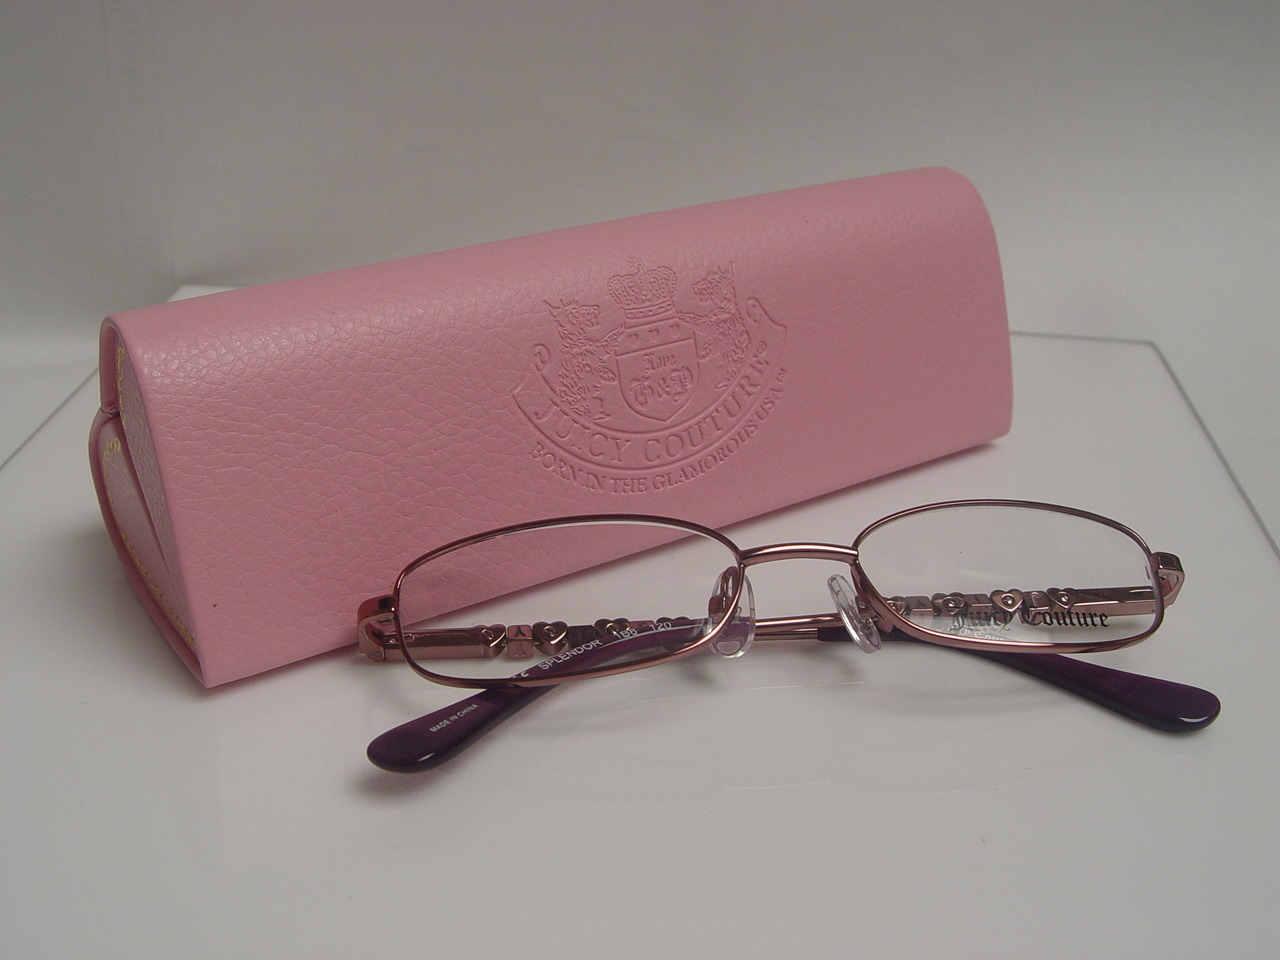 Juciy Couture Eyeglasses and pink heart shaped eyeglass case.